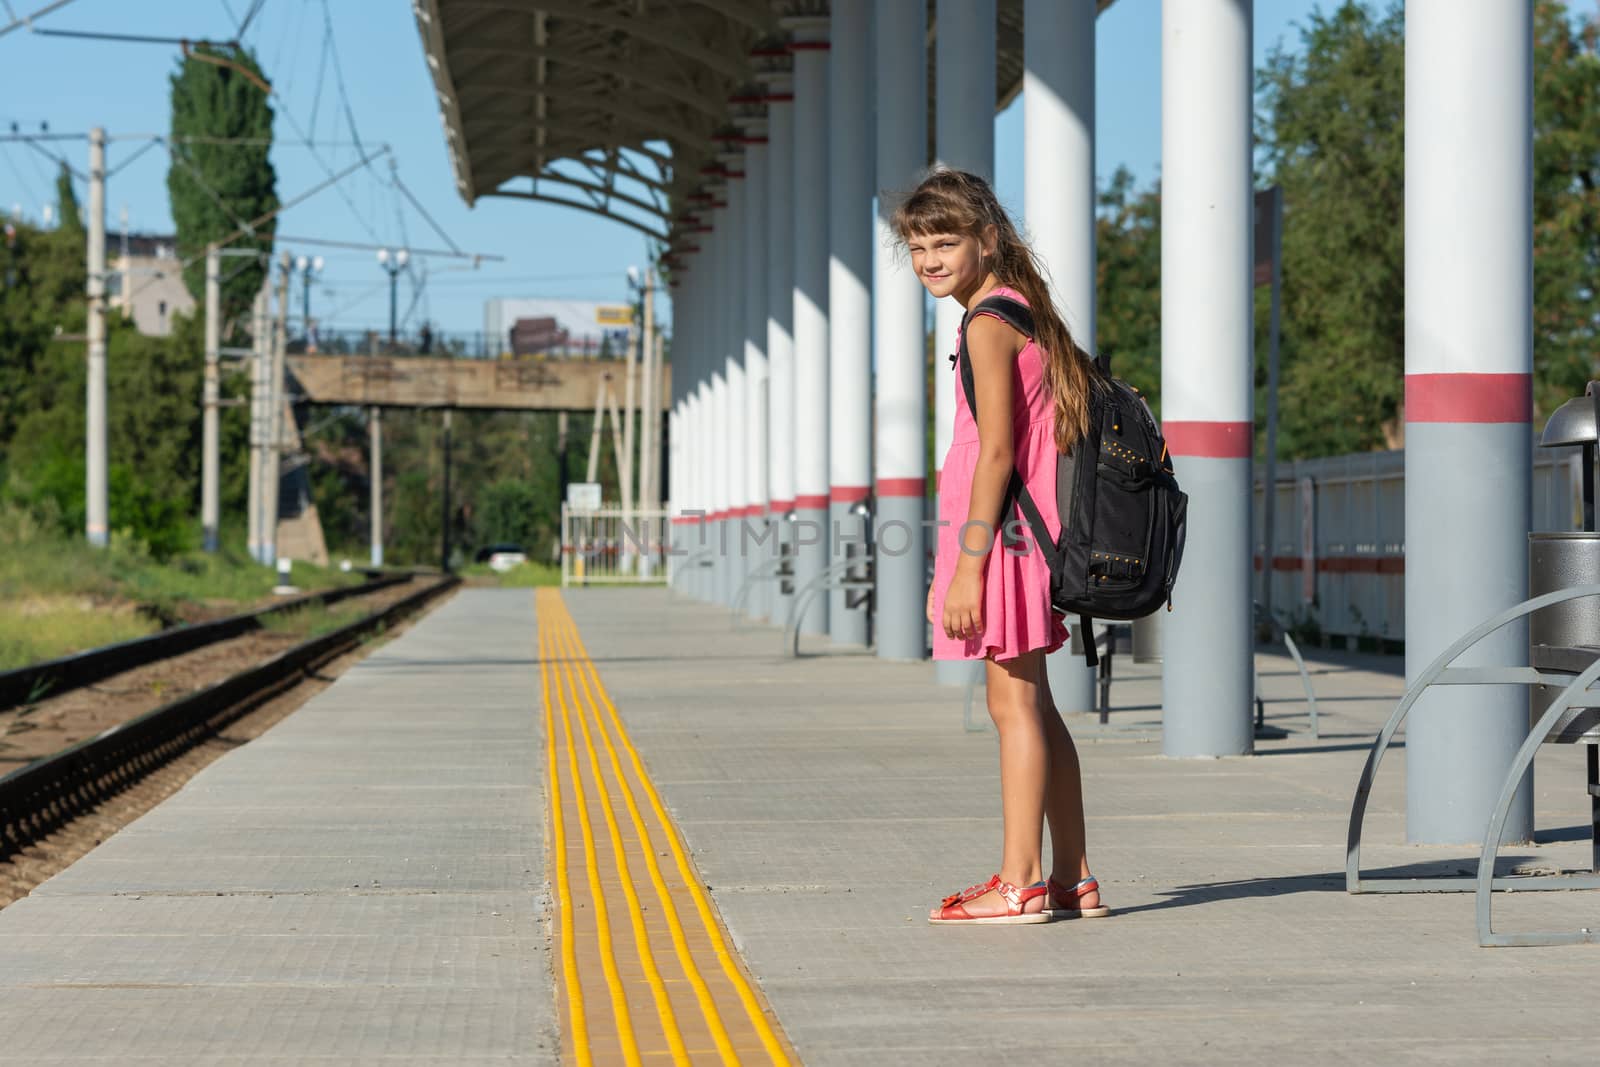 The eight-year-old girl on the platform of the railway station turned around and looked into the frame